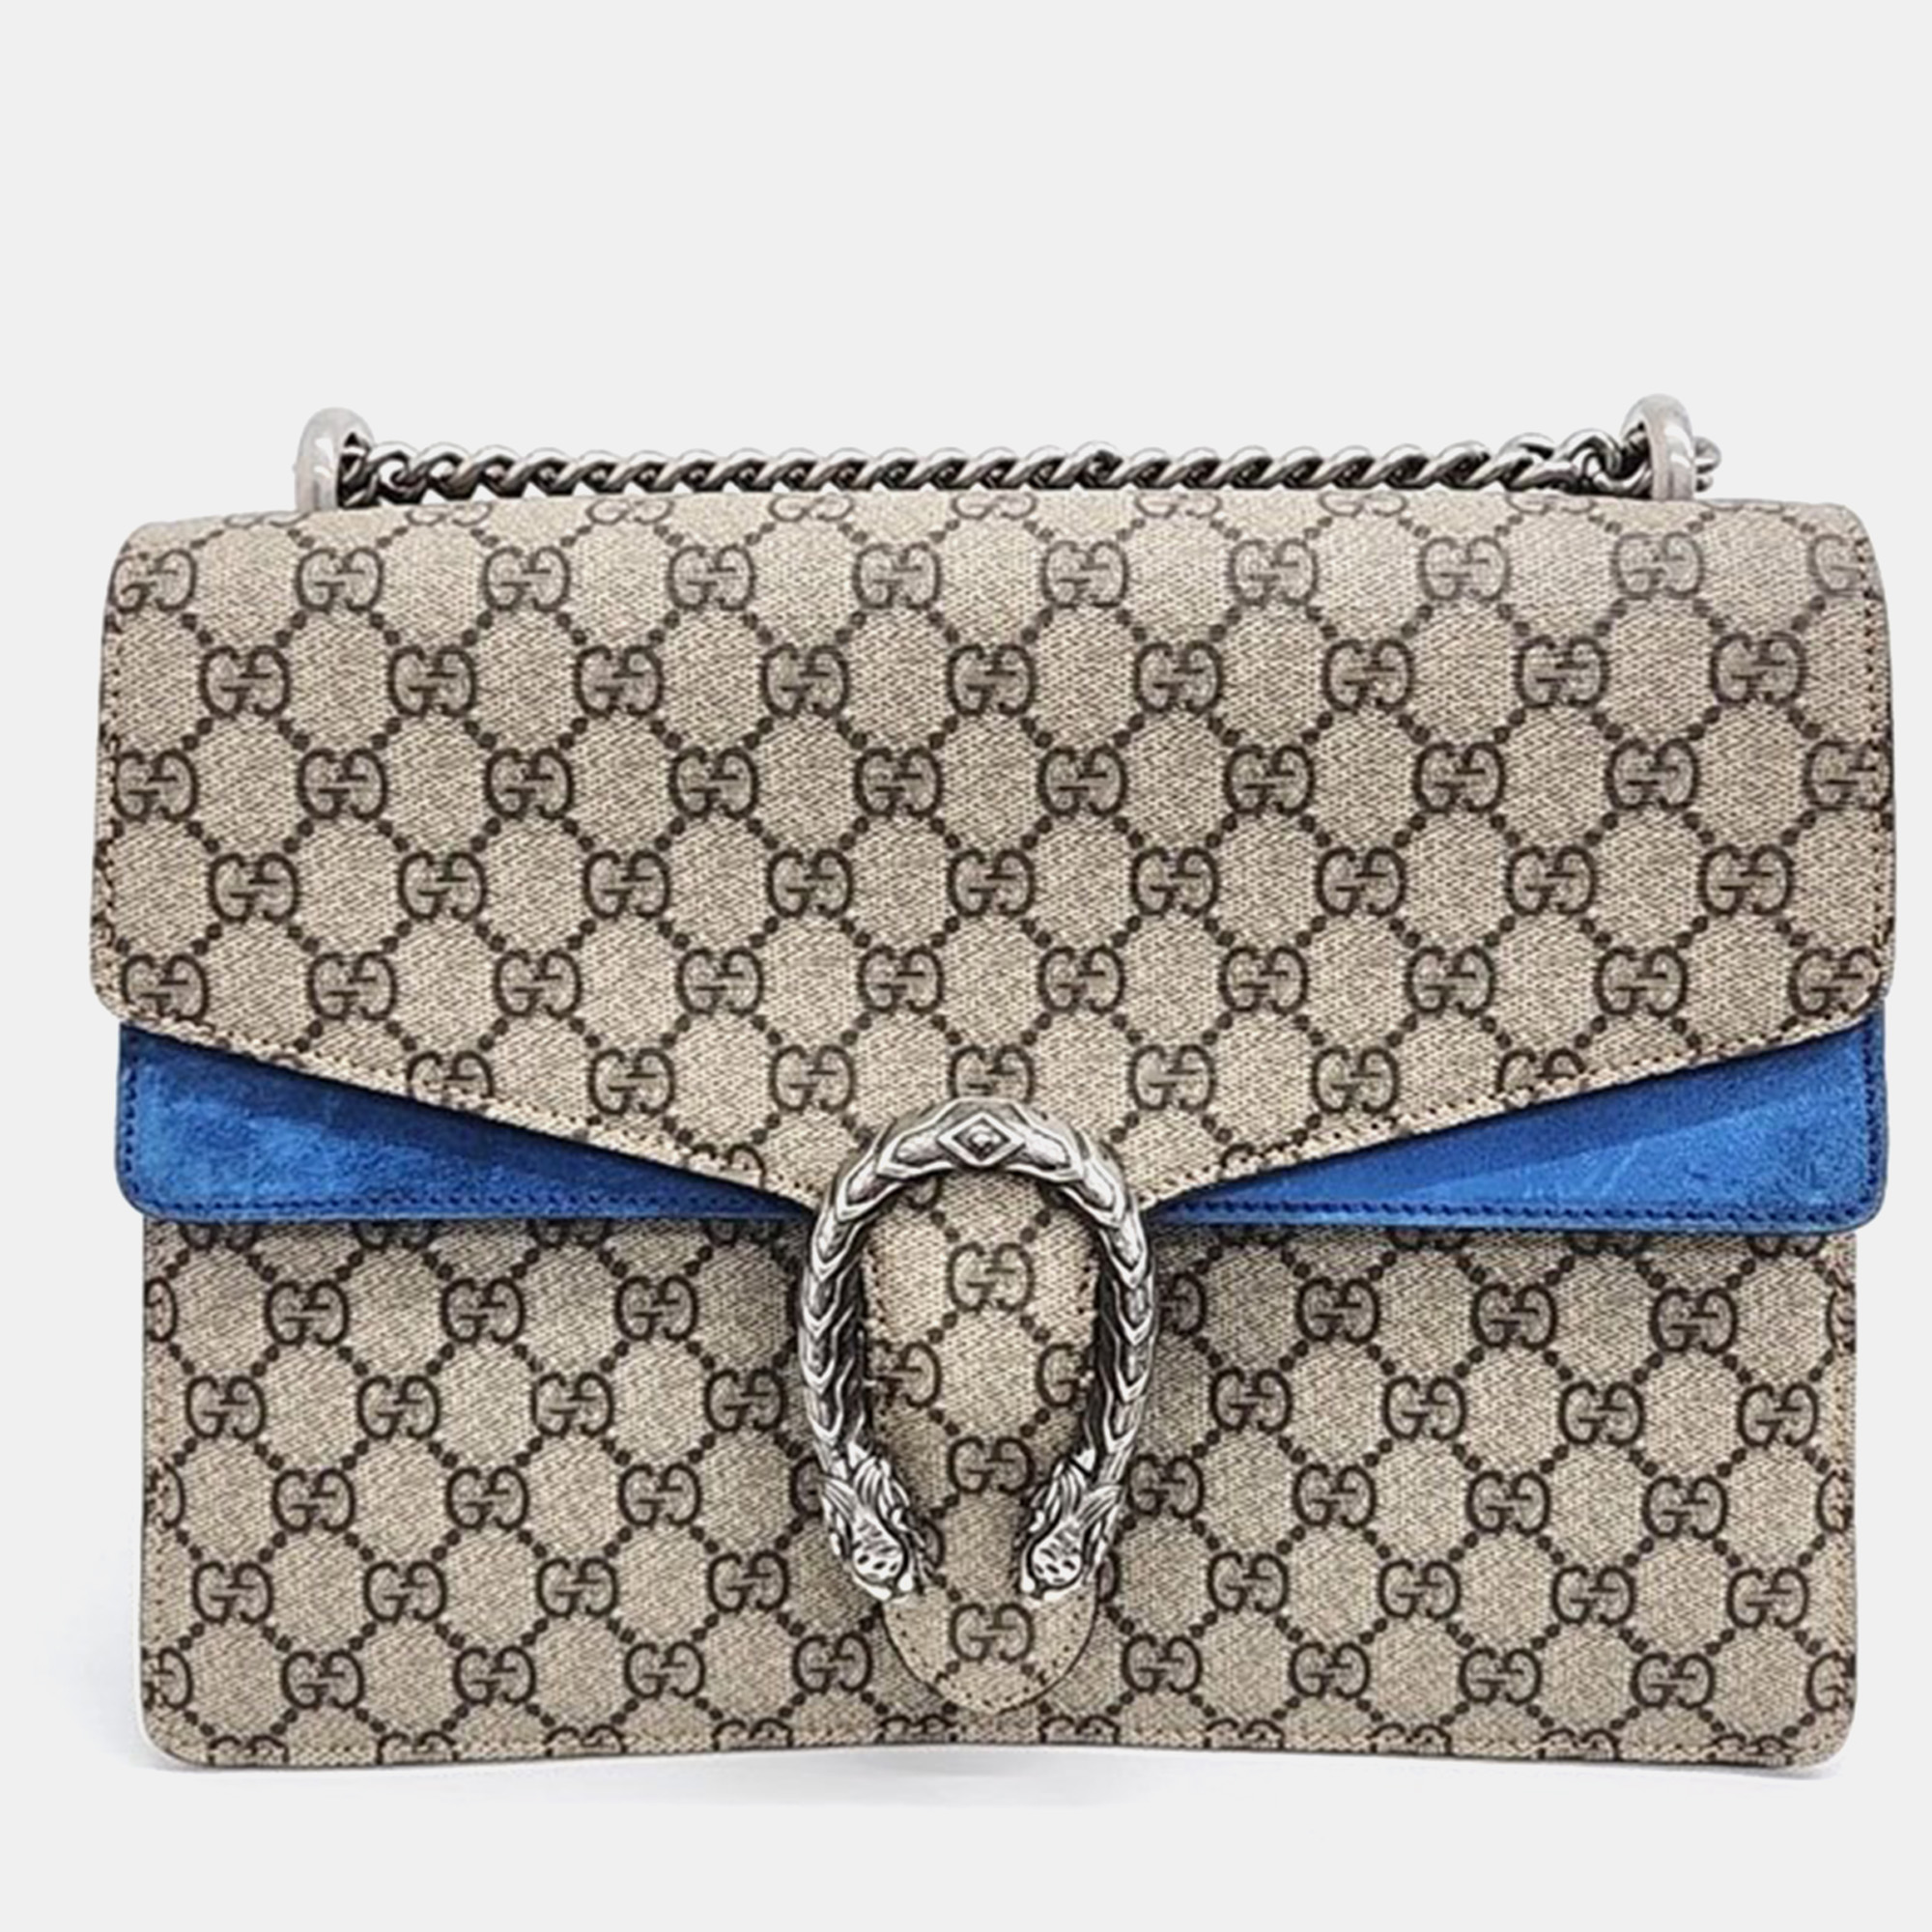 Elevate your style with this Gucci bag. Merging form and function this exquisite accessory epitomizes sophistication ensuring you stand out with elegance and practicality by your side.